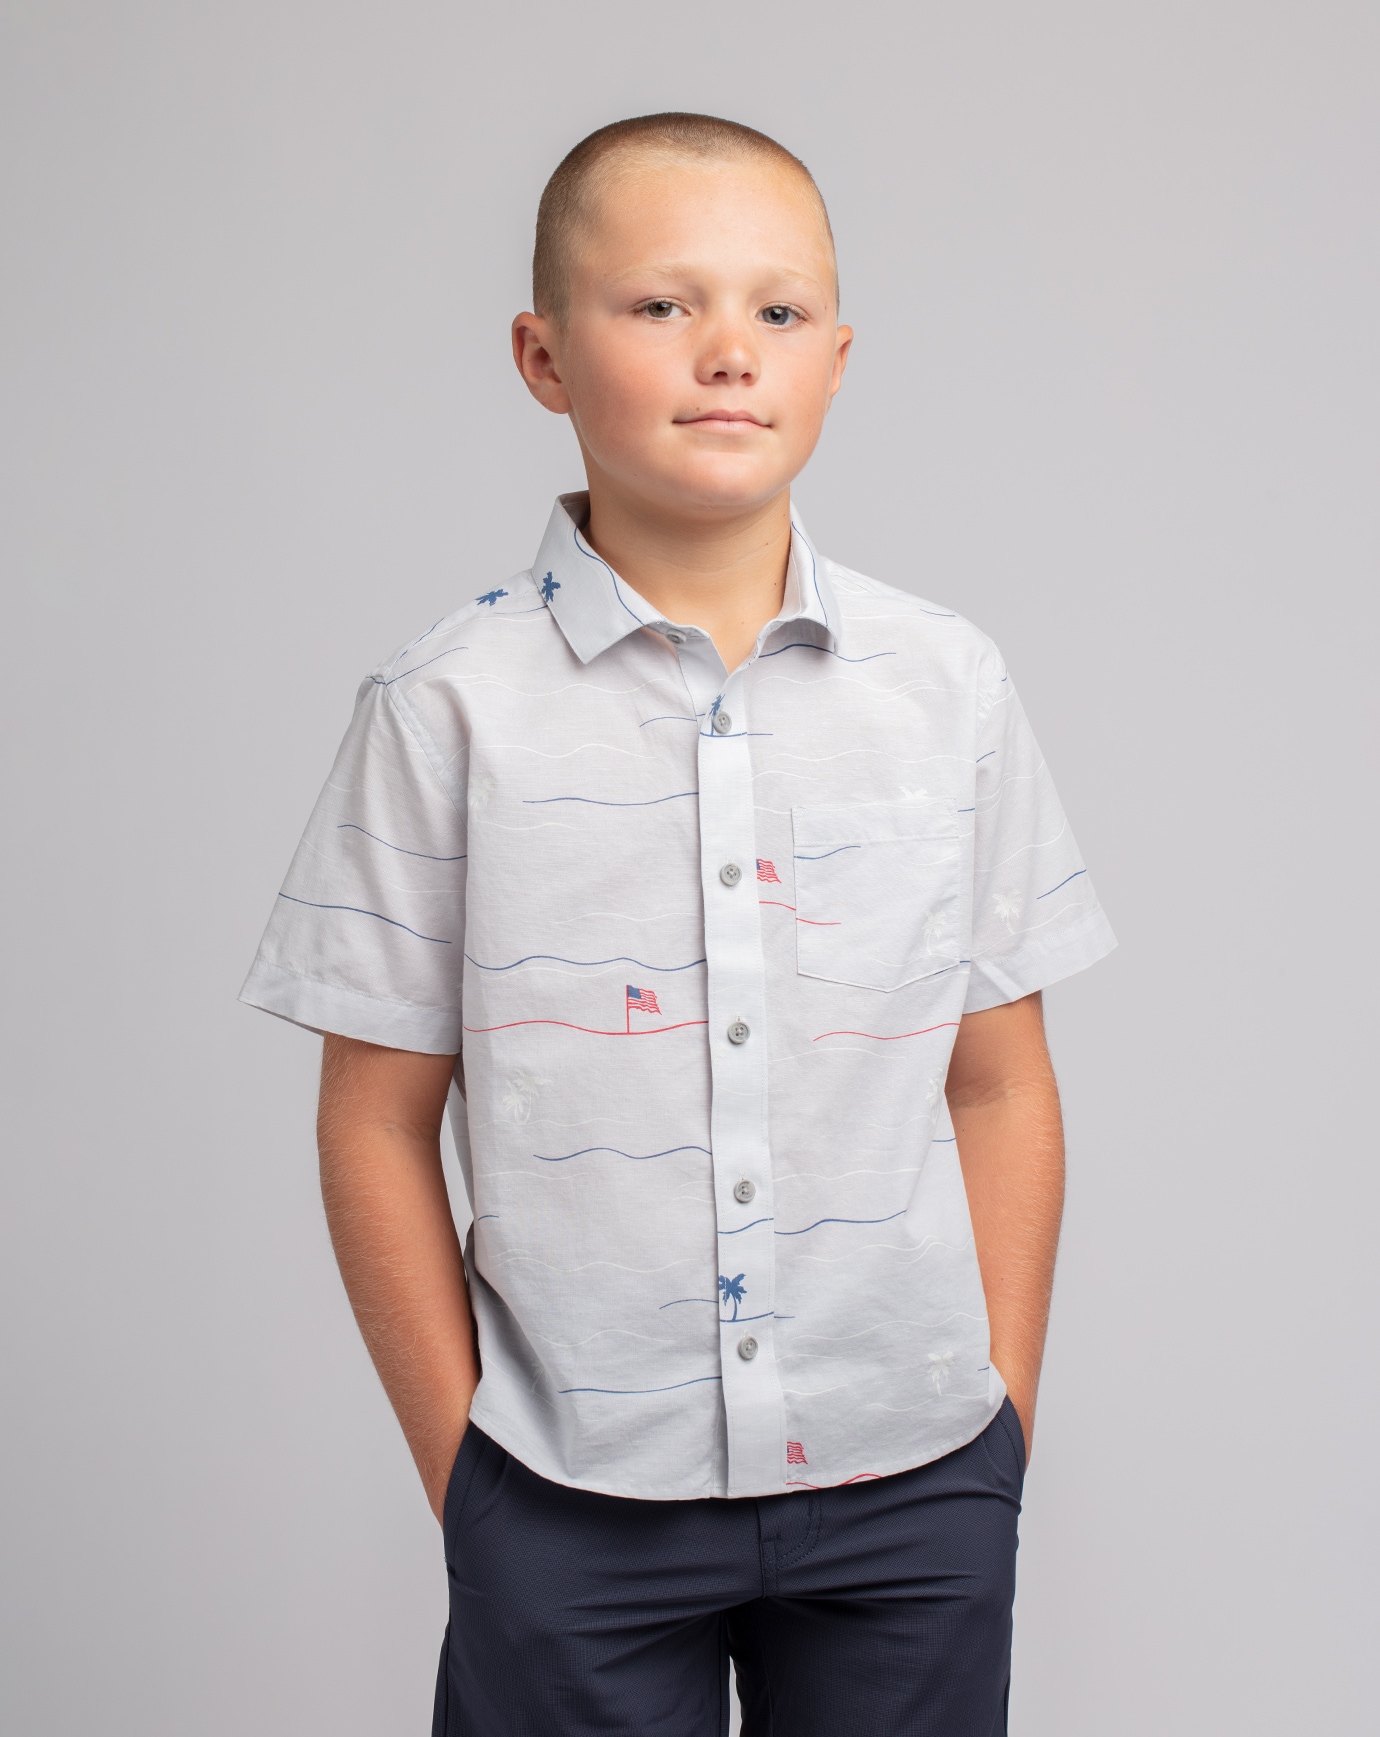 Star Spangled Banner Youth Button-up